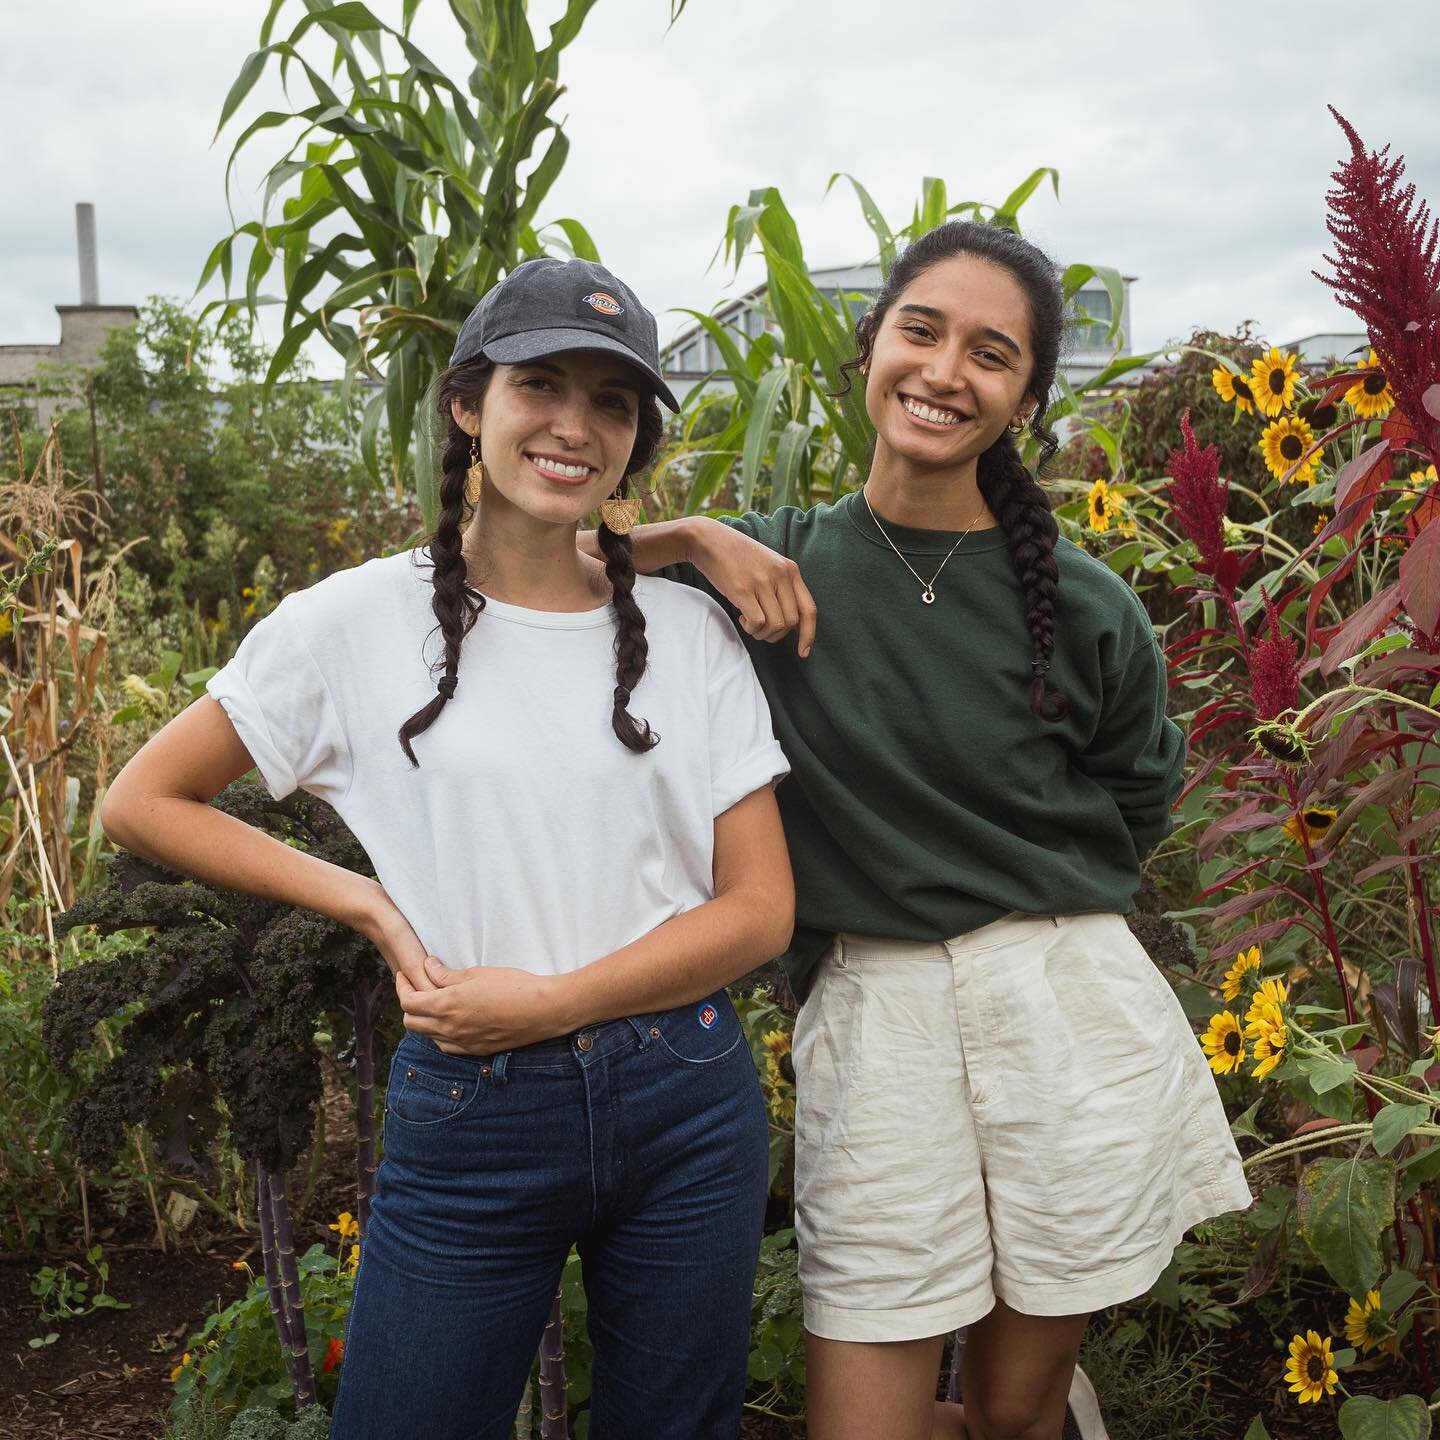 This year the team at @umanotaculture has started a portrait series of Geary community members. Here is our first portrait ✨

Introducing Paula Sofia (@paulasofiamv) and Laura Rojas (@laurrojas) of the Geary Community Garden. This is a grassroots, re